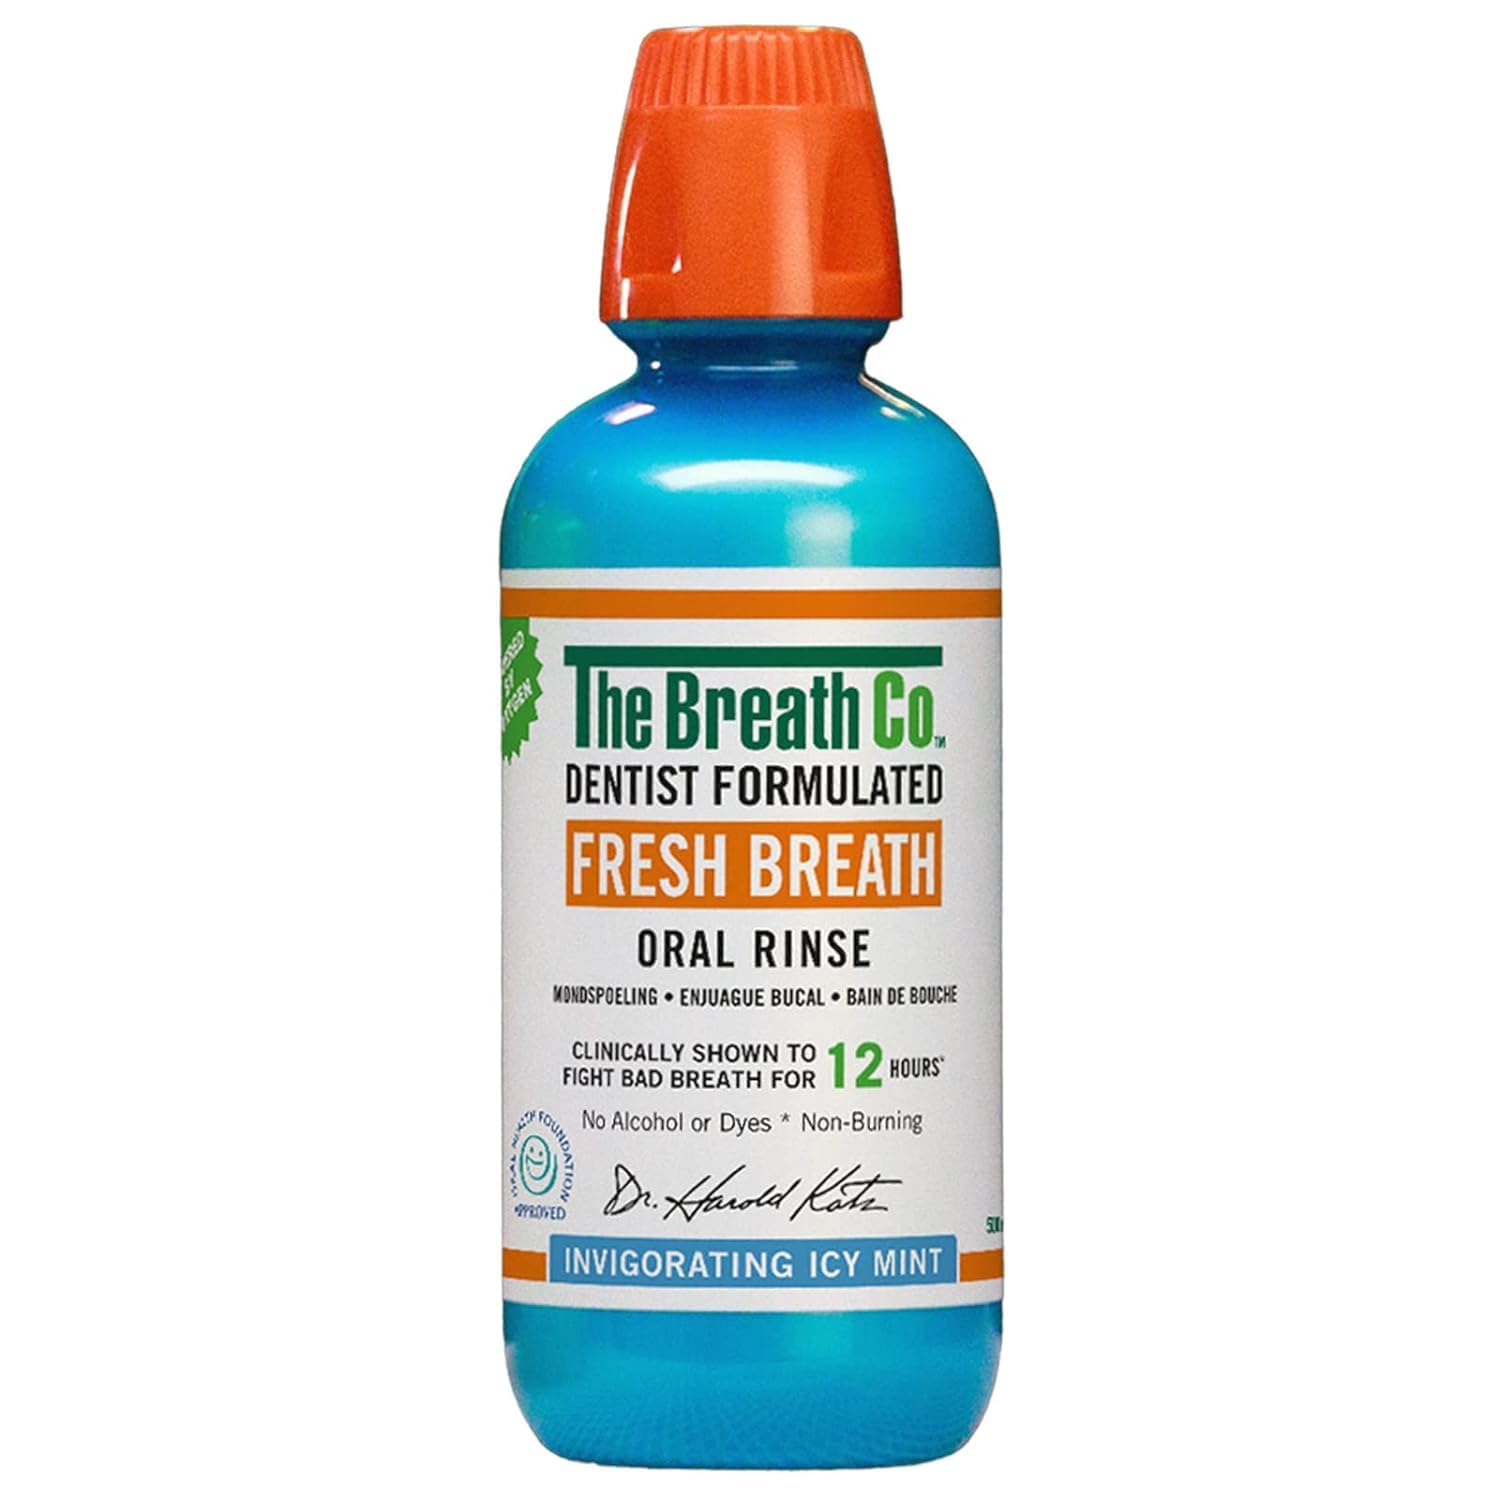 The Breath Co Alcohol Free Mouthwash